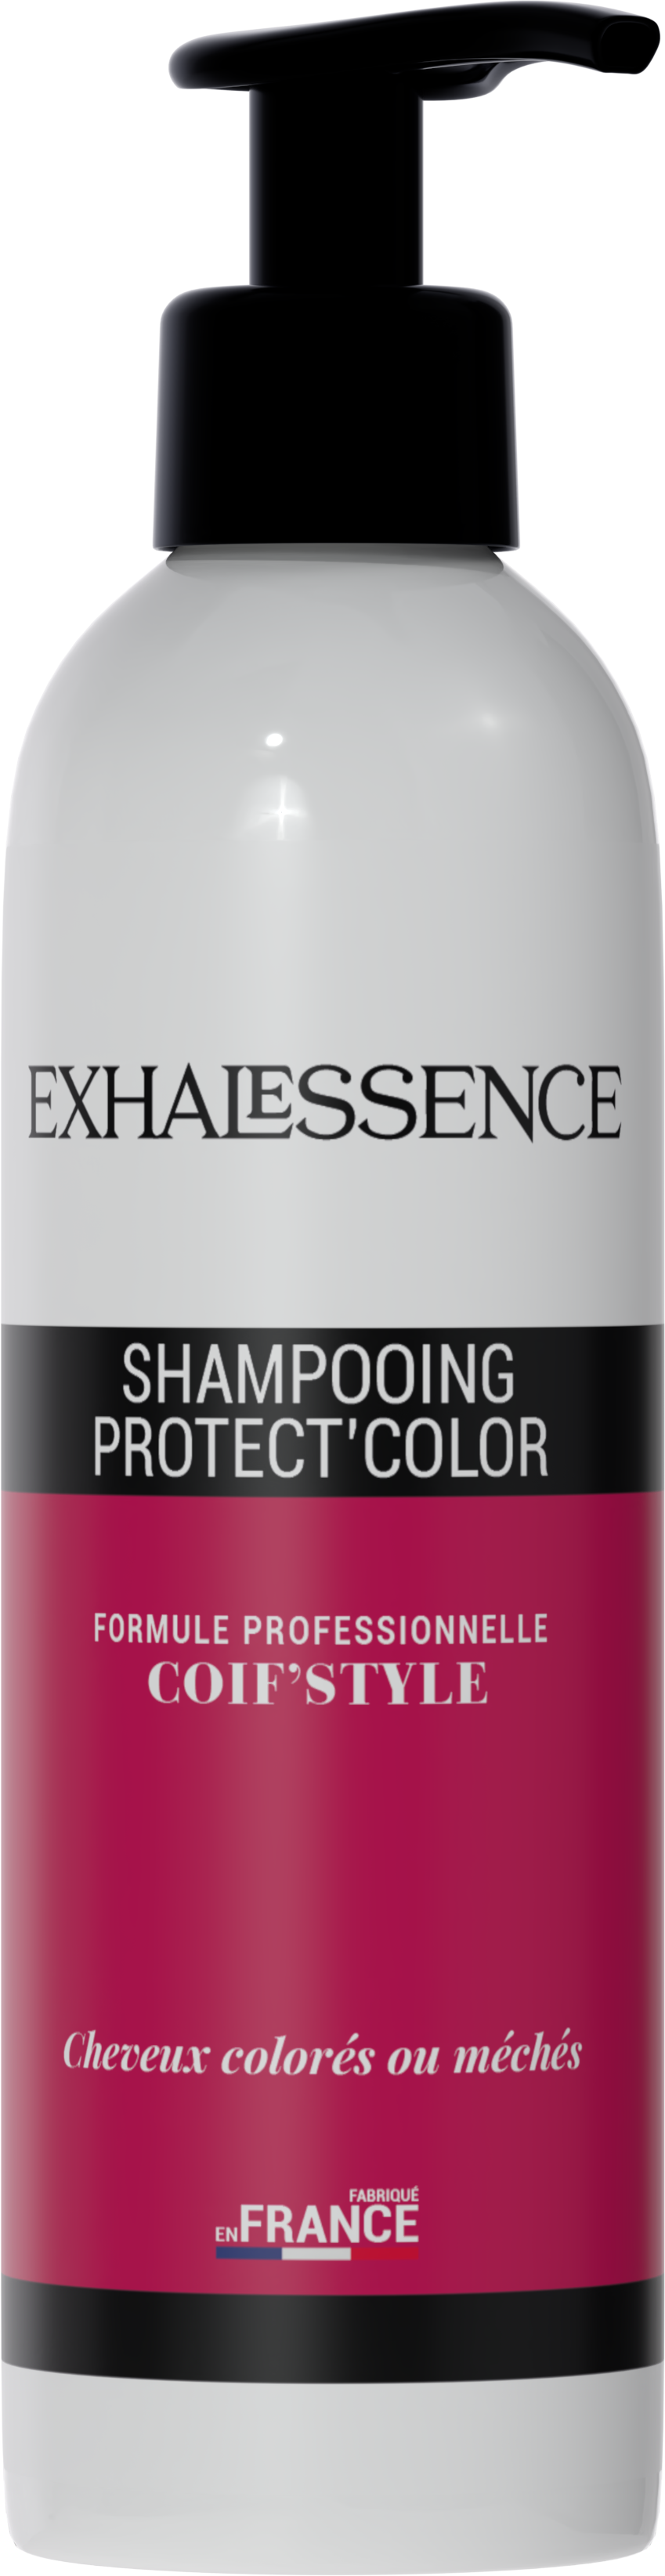 SHAMPOOING PROTECT COLOR.png